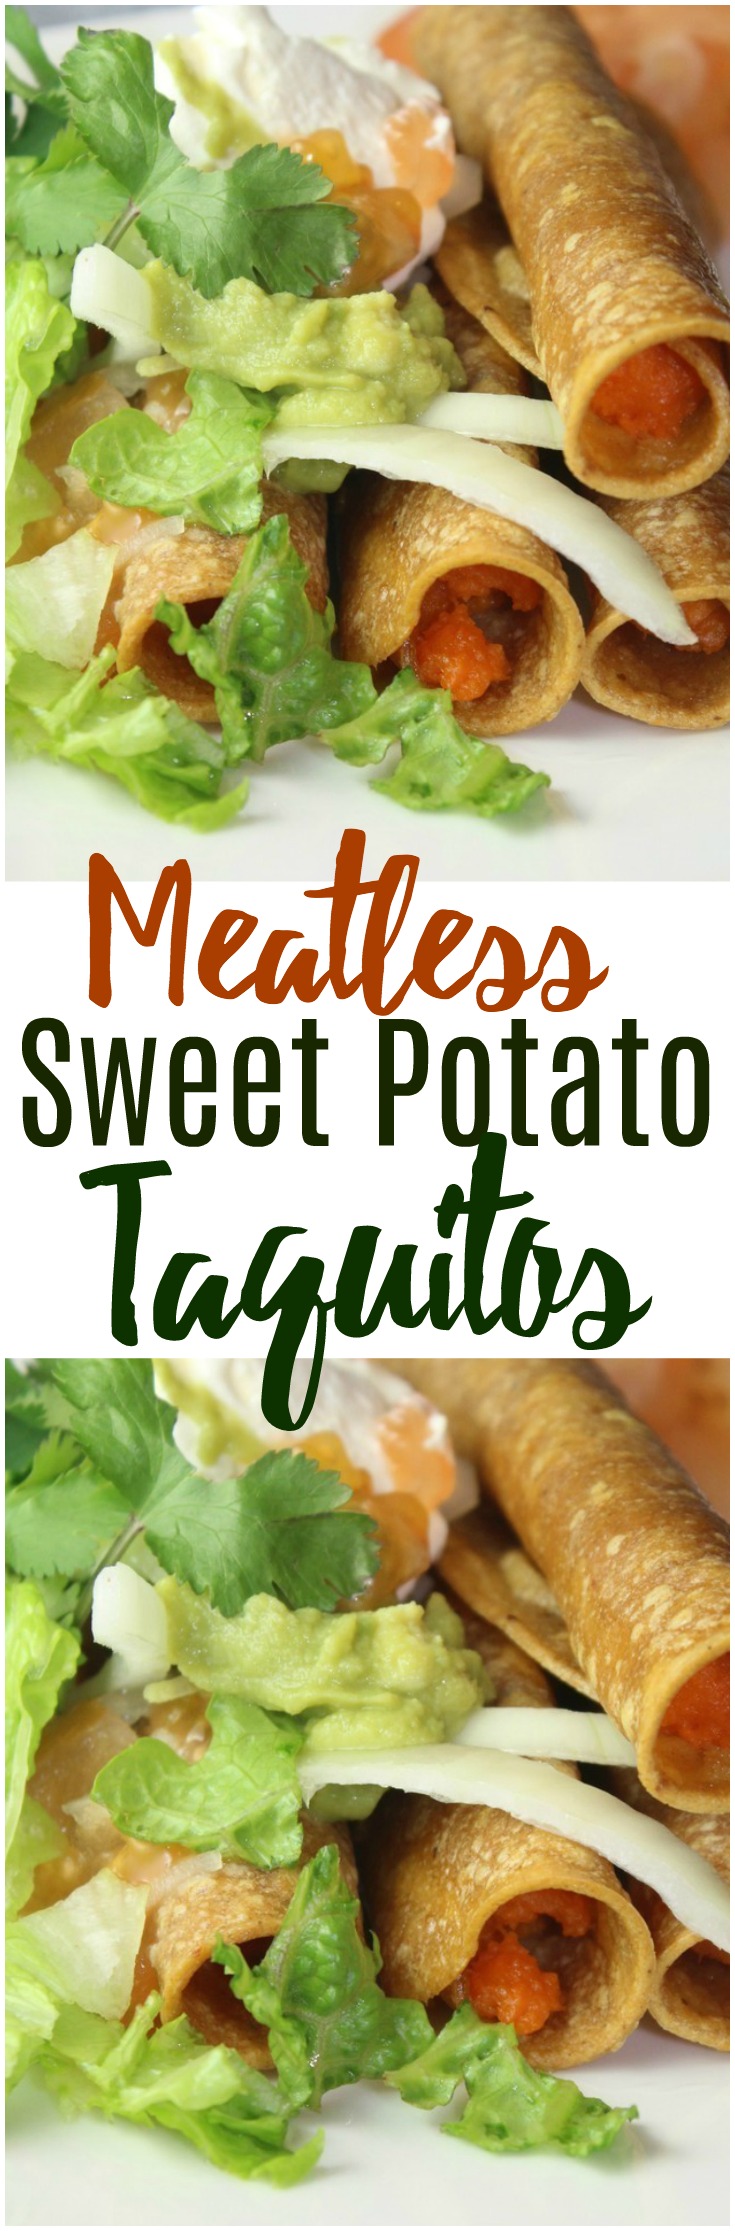 Baked sweet potato taquitos that are delicious when topped with shredded lettuce, tomatoes, sour cream and guacamole. #meatless #sweetpotato #mexican